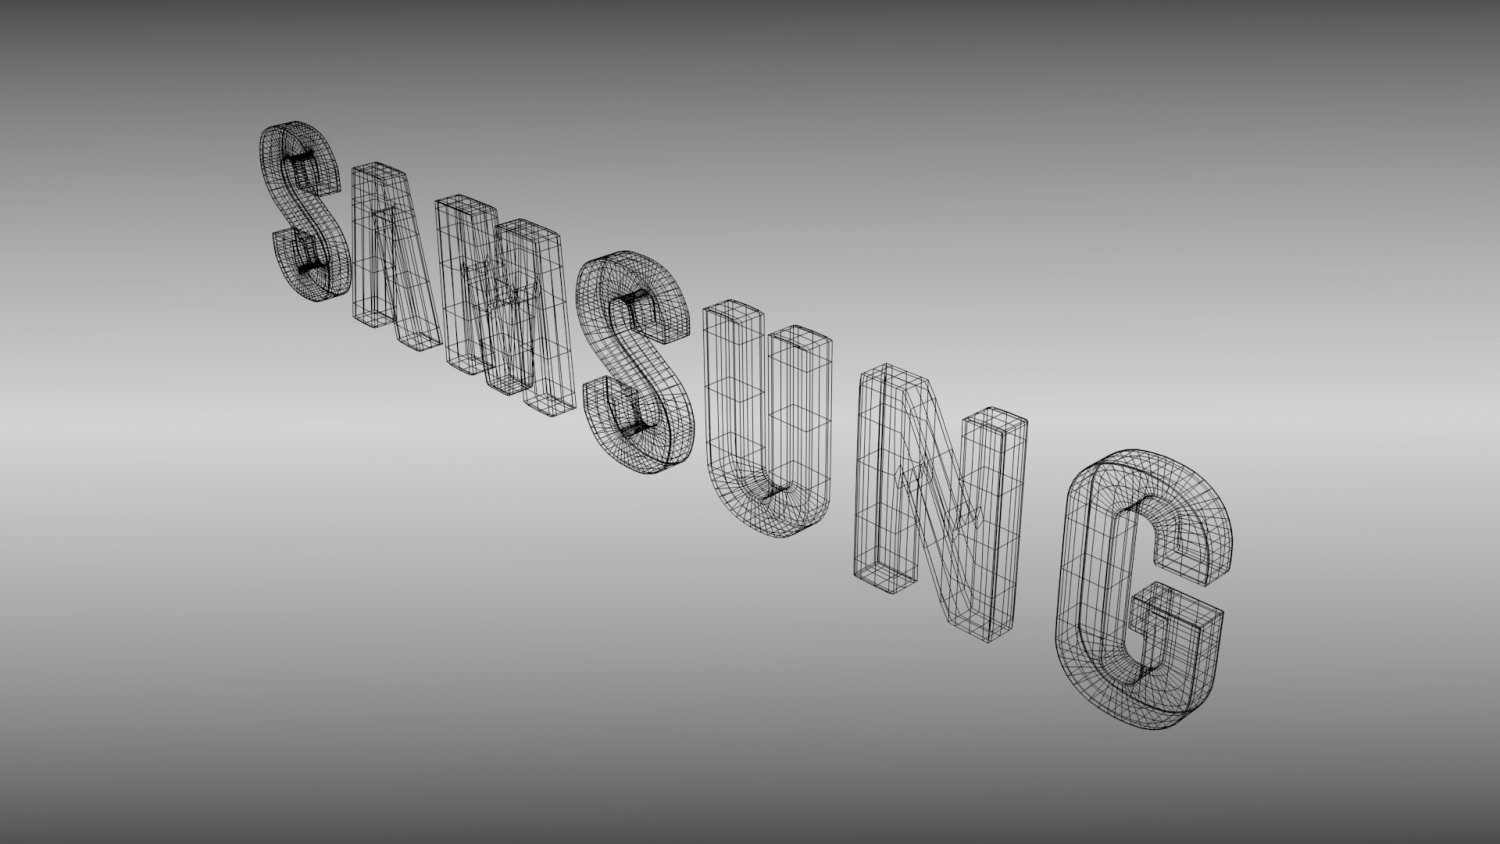 7,803 Samsung Logo Images, Stock Photos, 3D objects, & Vectors